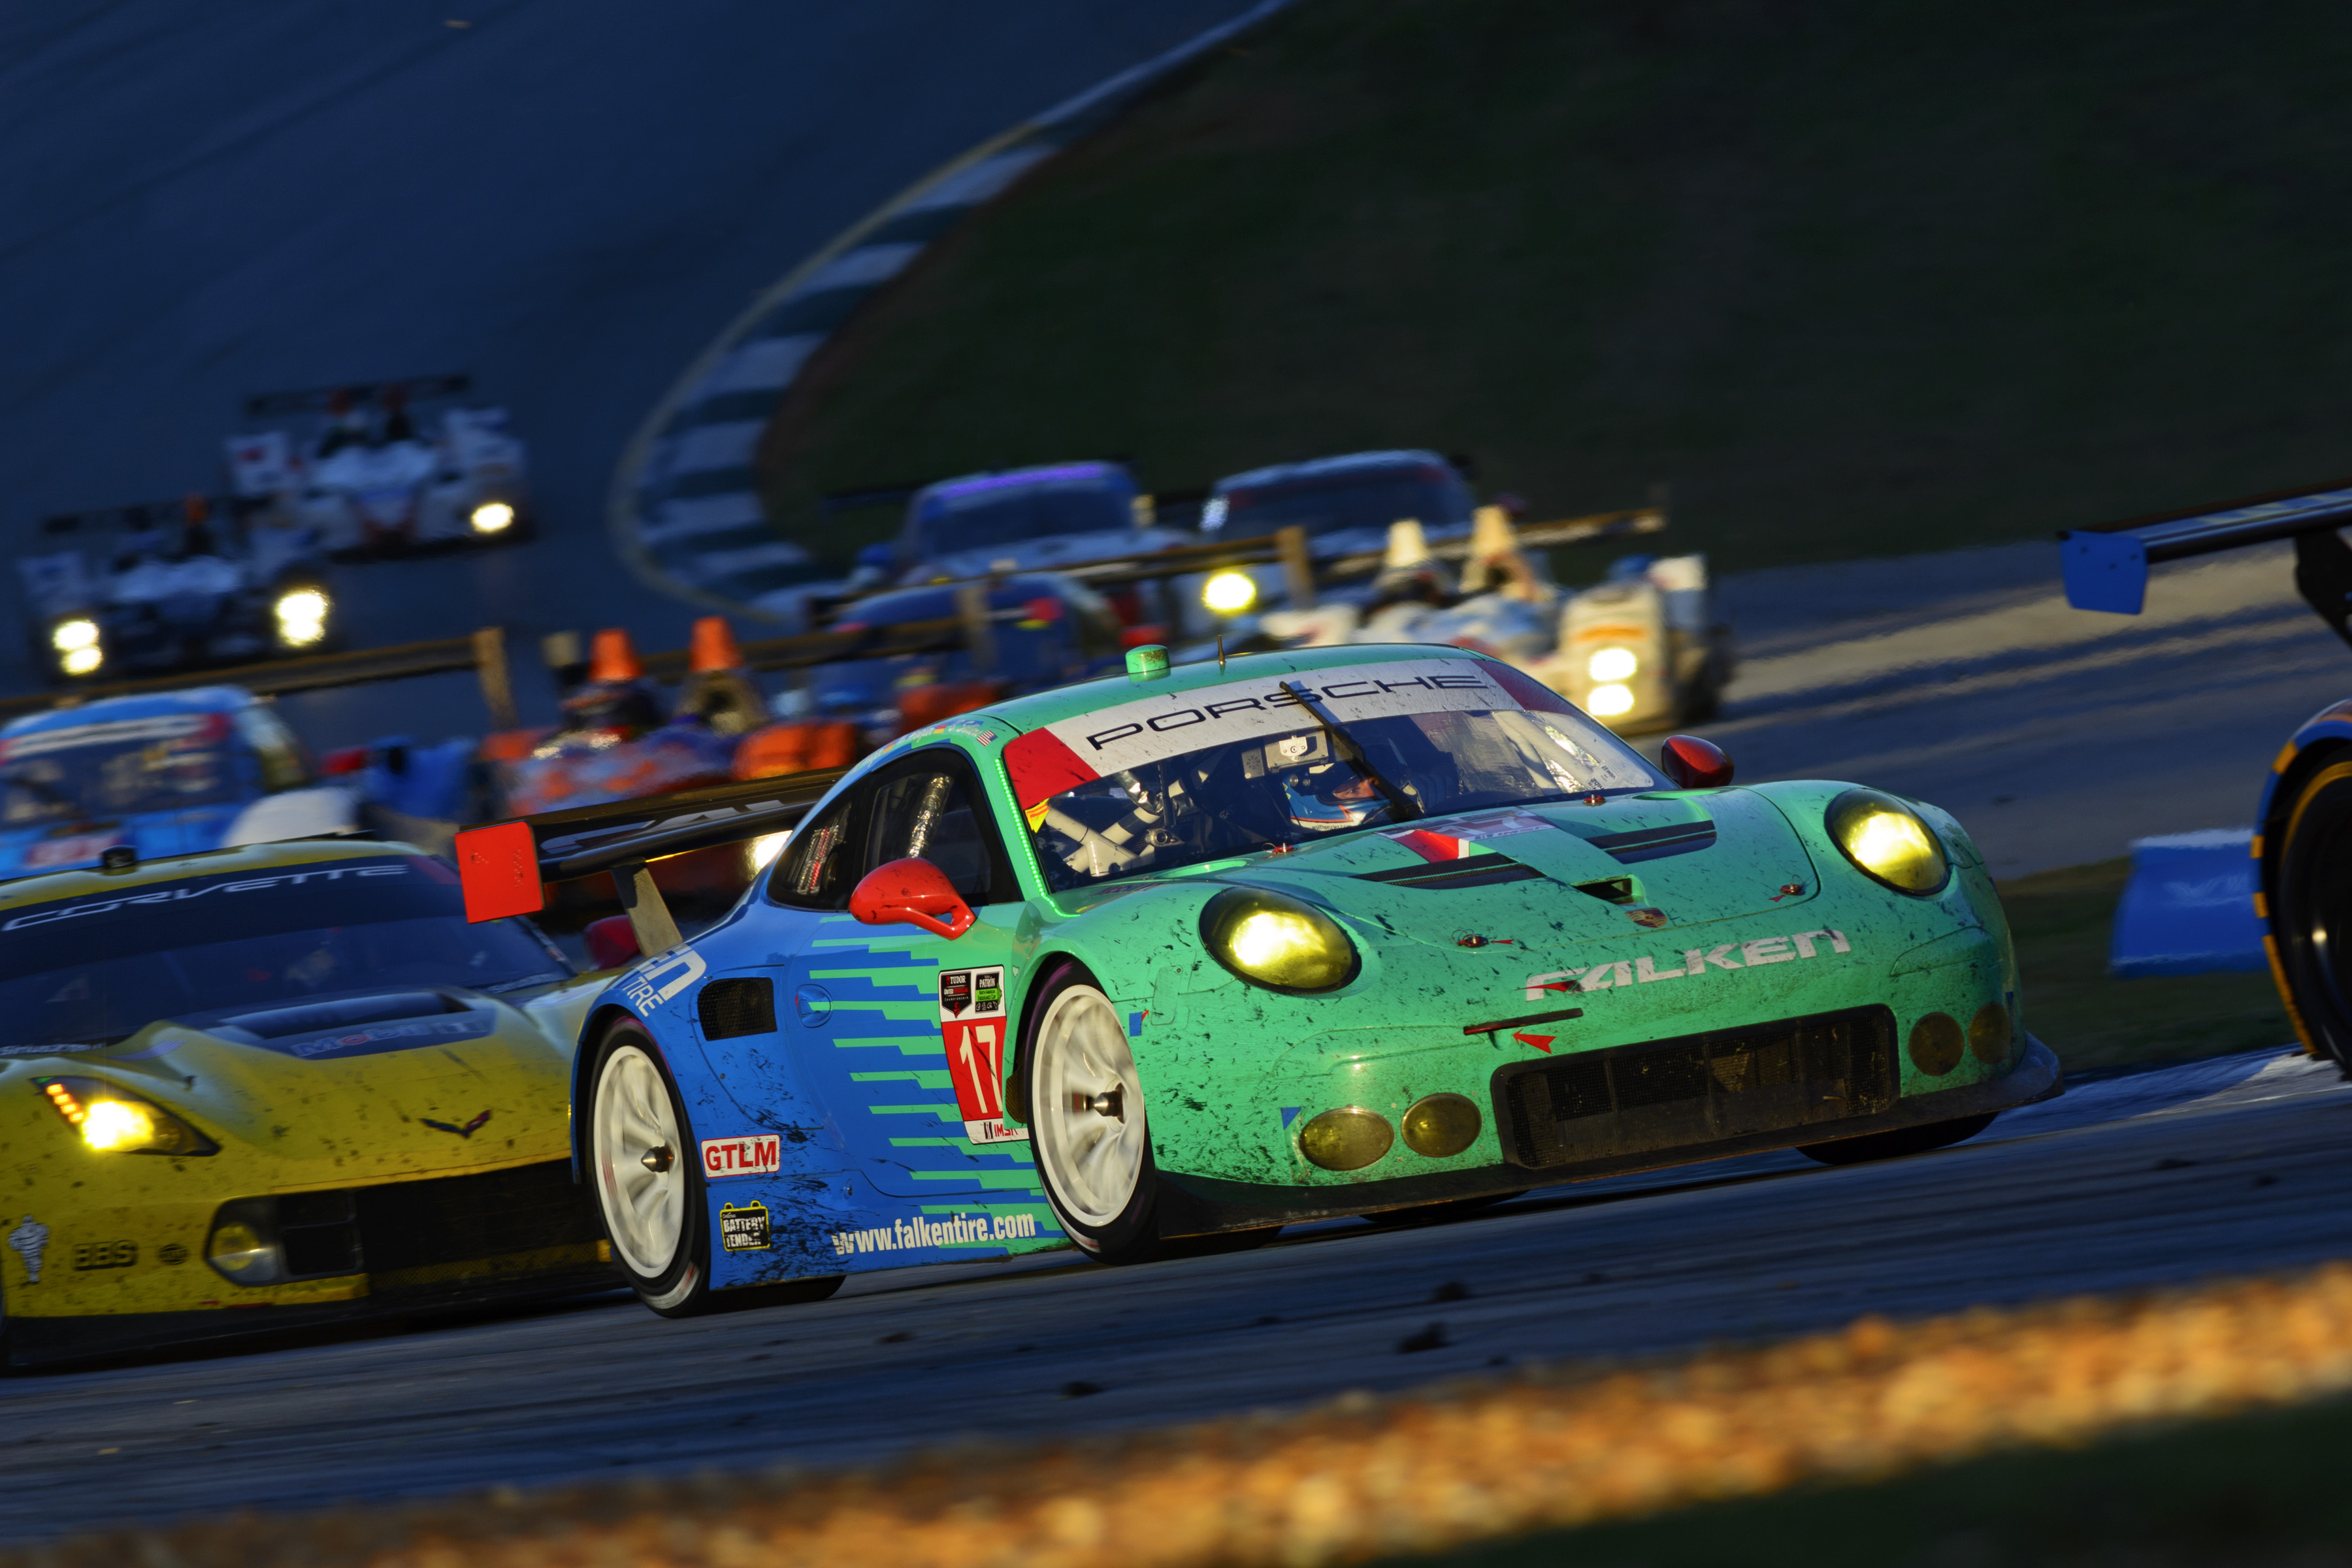 The iconic teal and blue Falken Tire Porsche 911 RSR at Road Atlanta.